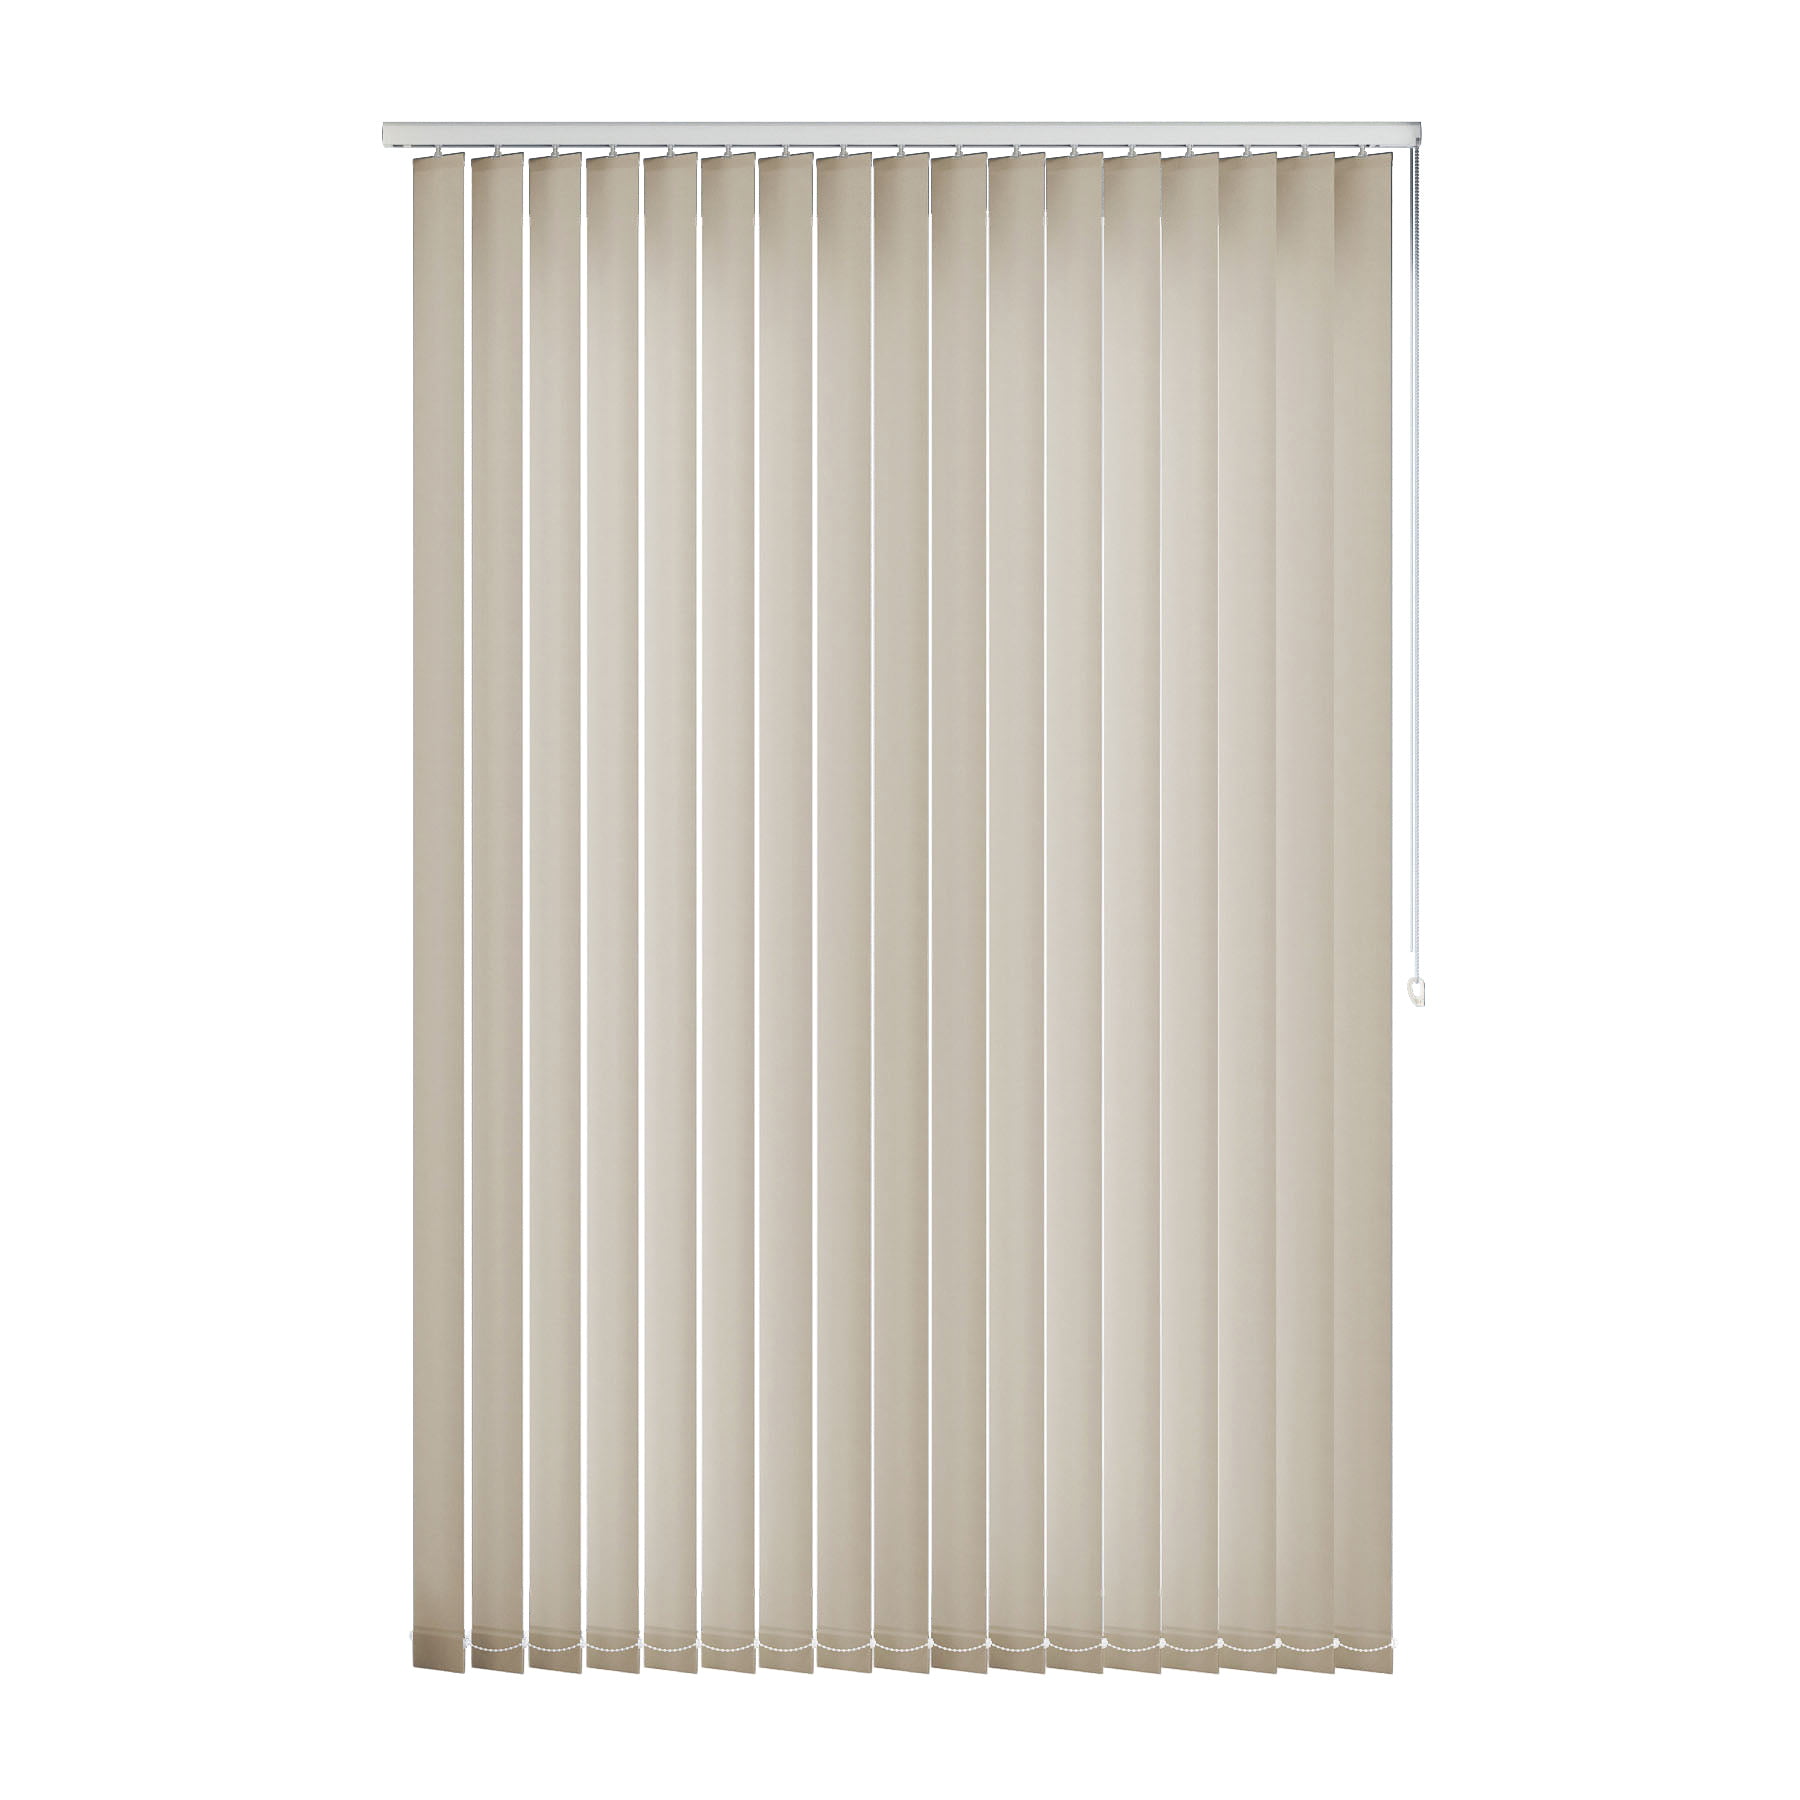 Modesty Vertical Blind - Shutters and Blinds Online